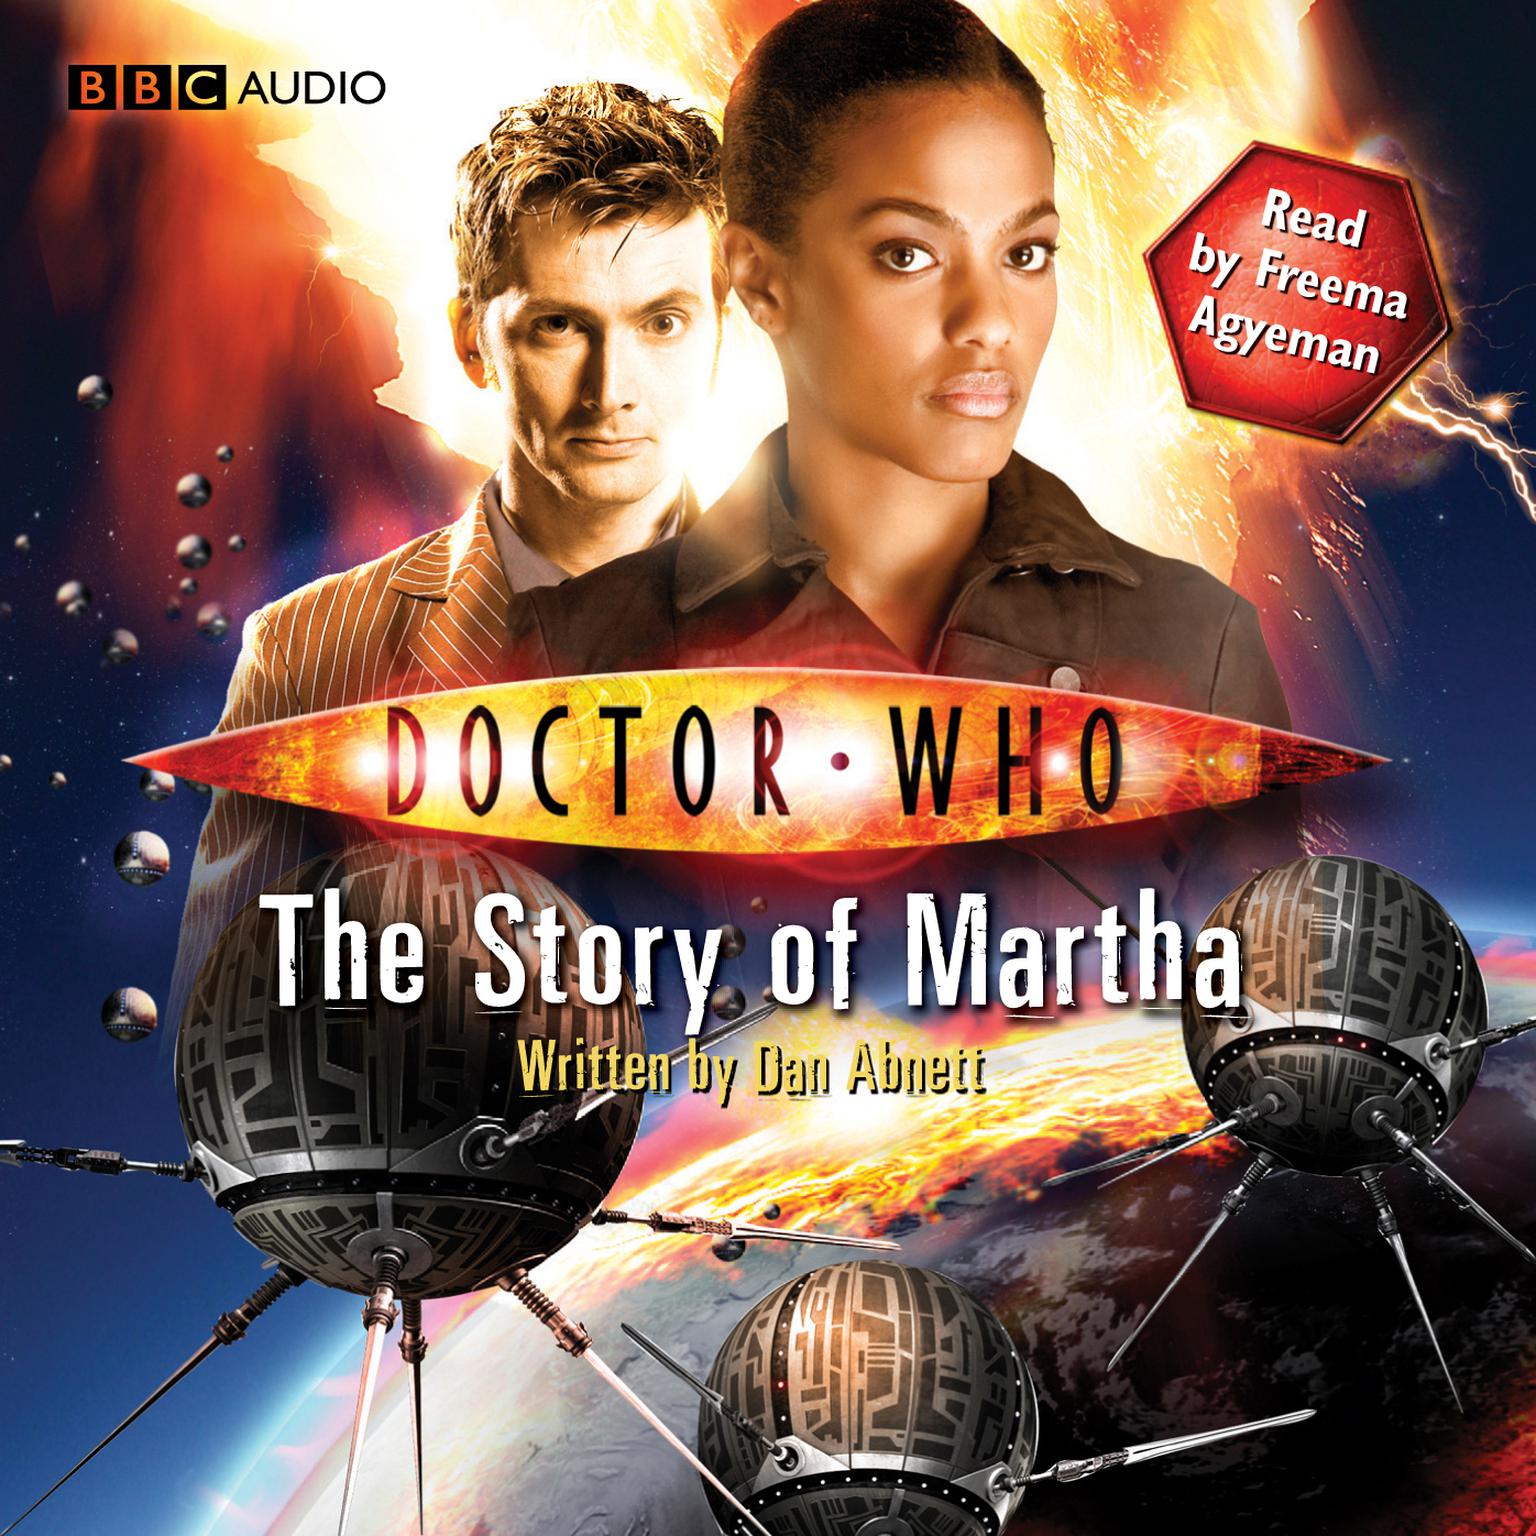 Doctor Who: The Story of Martha (Abridged) Audiobook, by Dan Abnett